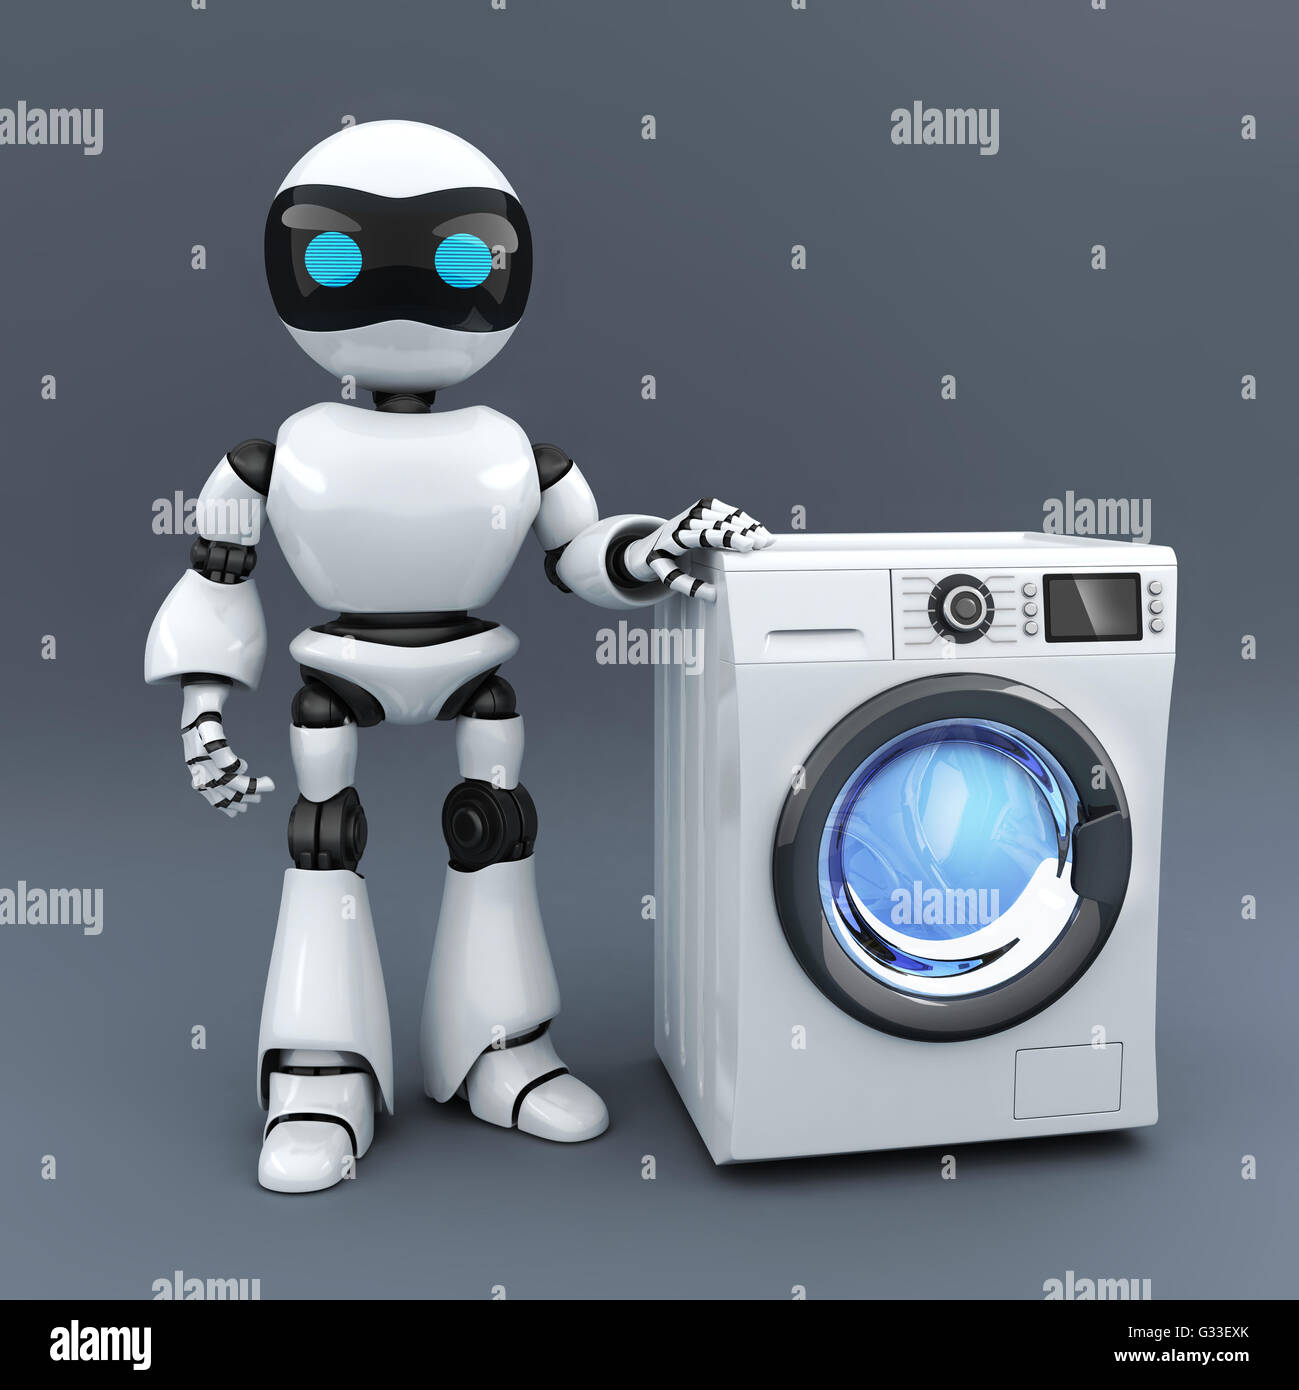 Modern white robot and clothes washer (done in 3d rendering) Stock Photo